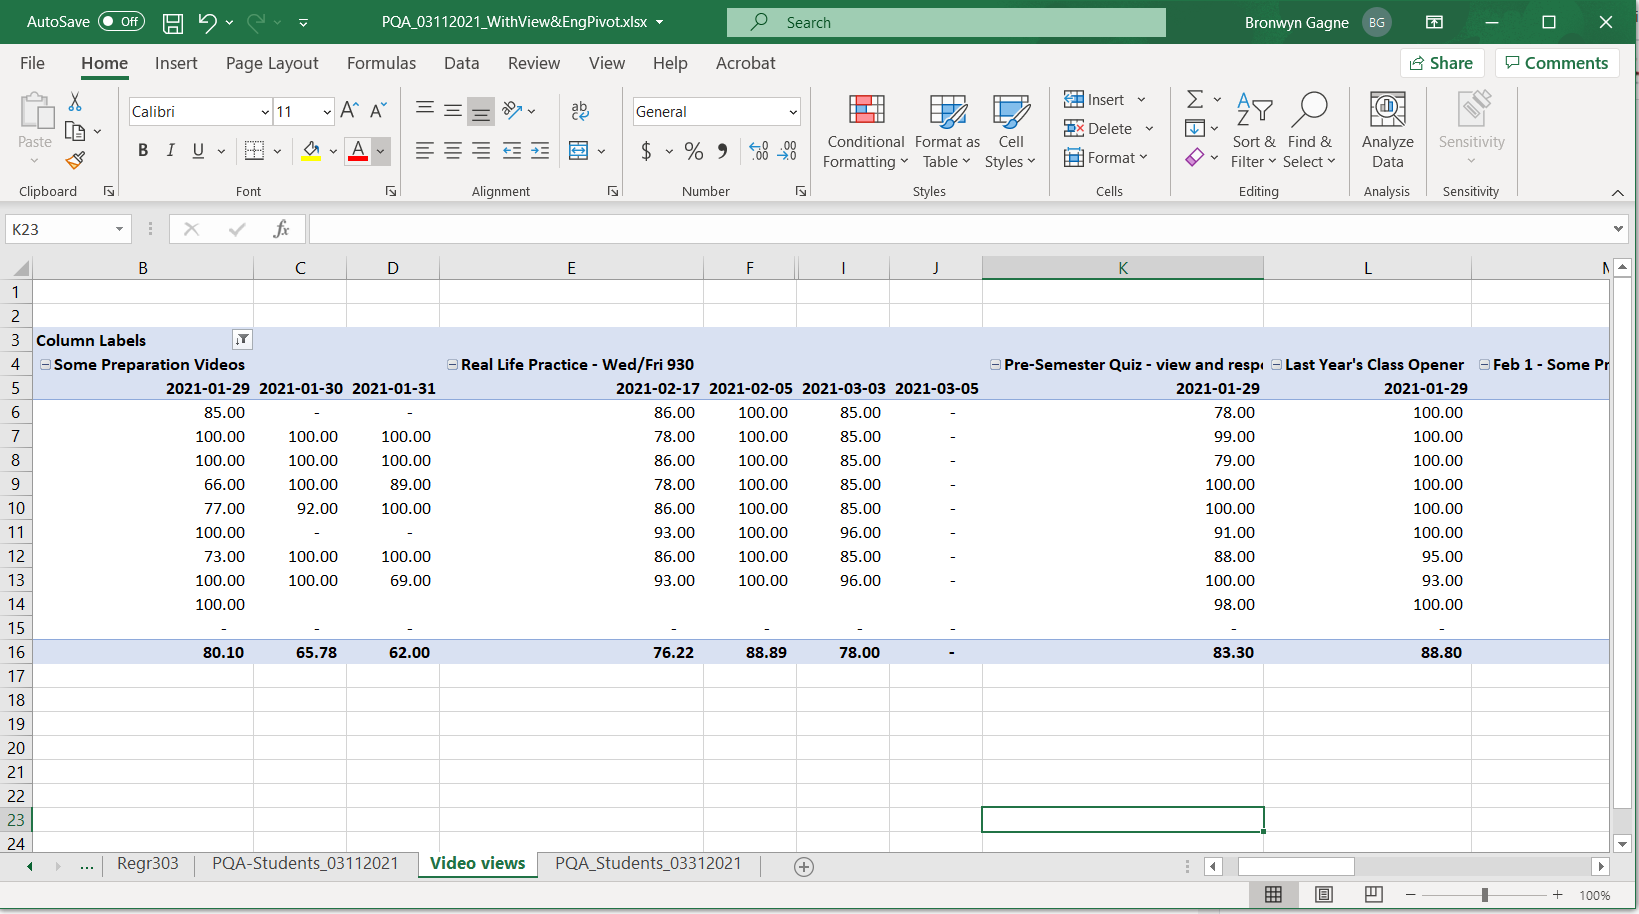 Pivot table showing new data set in original pivot table configuration as described